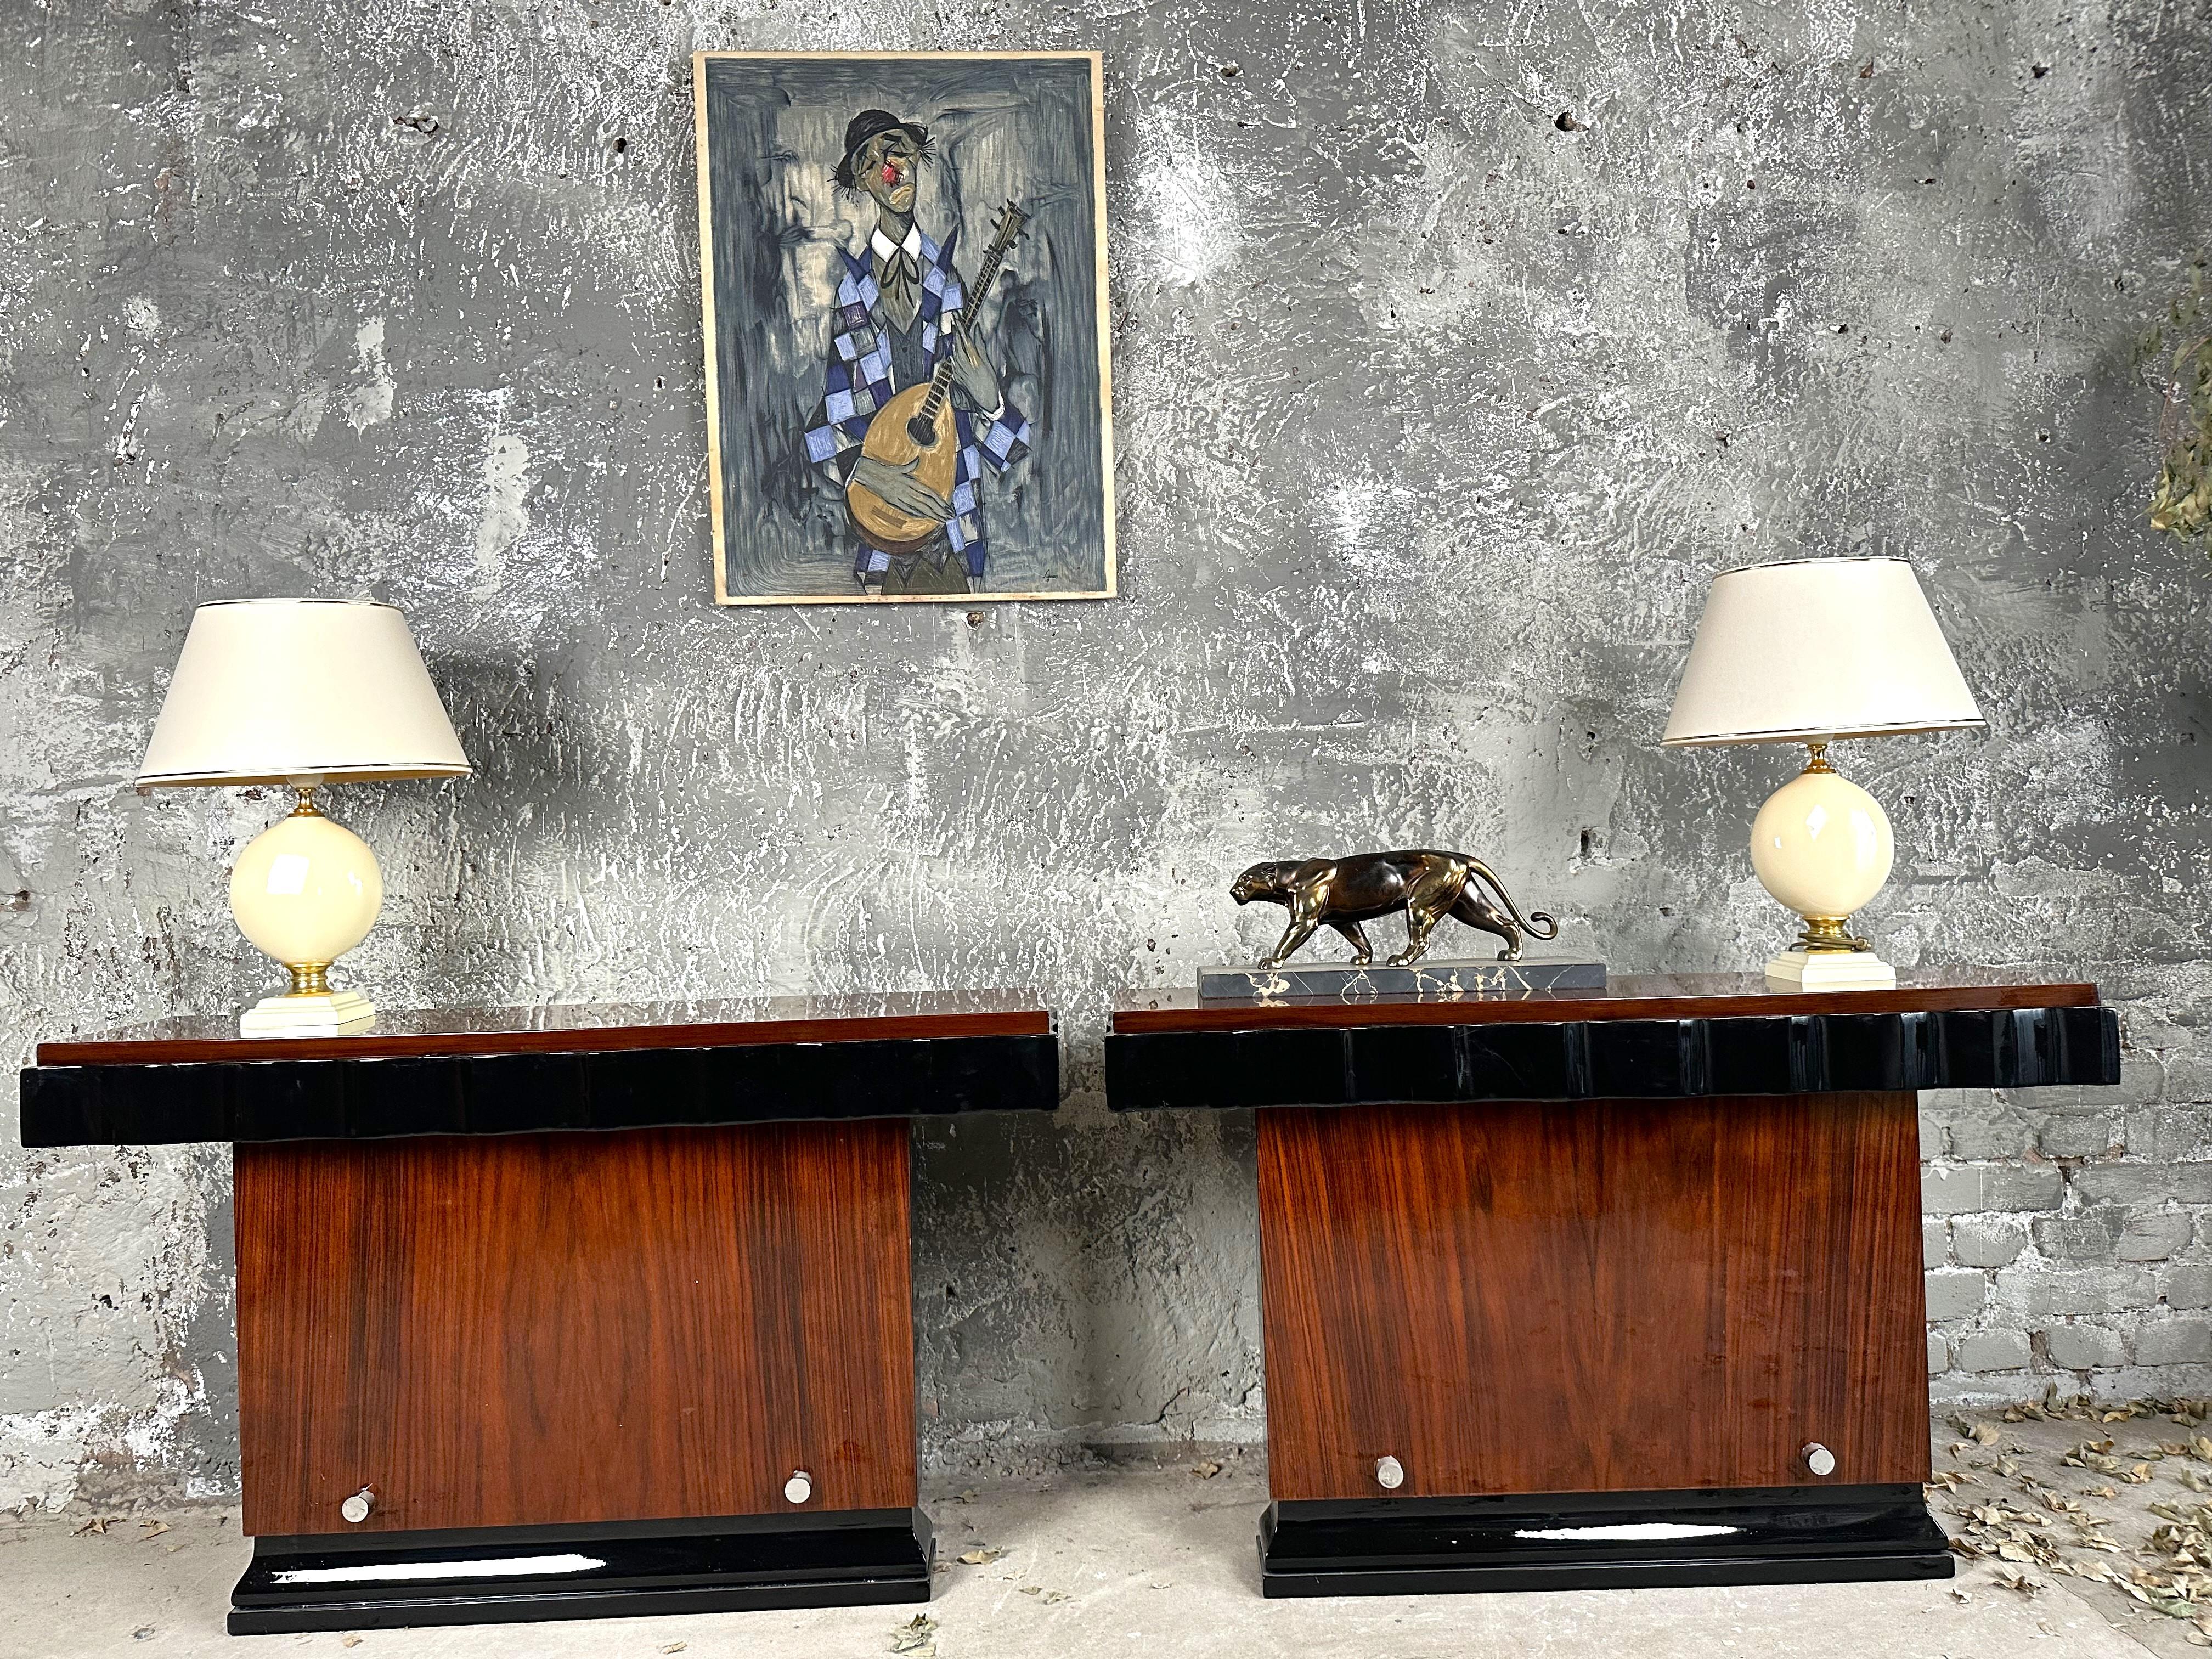 French Art Deco Modernist Pair of Console Tables by Kristian Krass, France 1935 For Sale